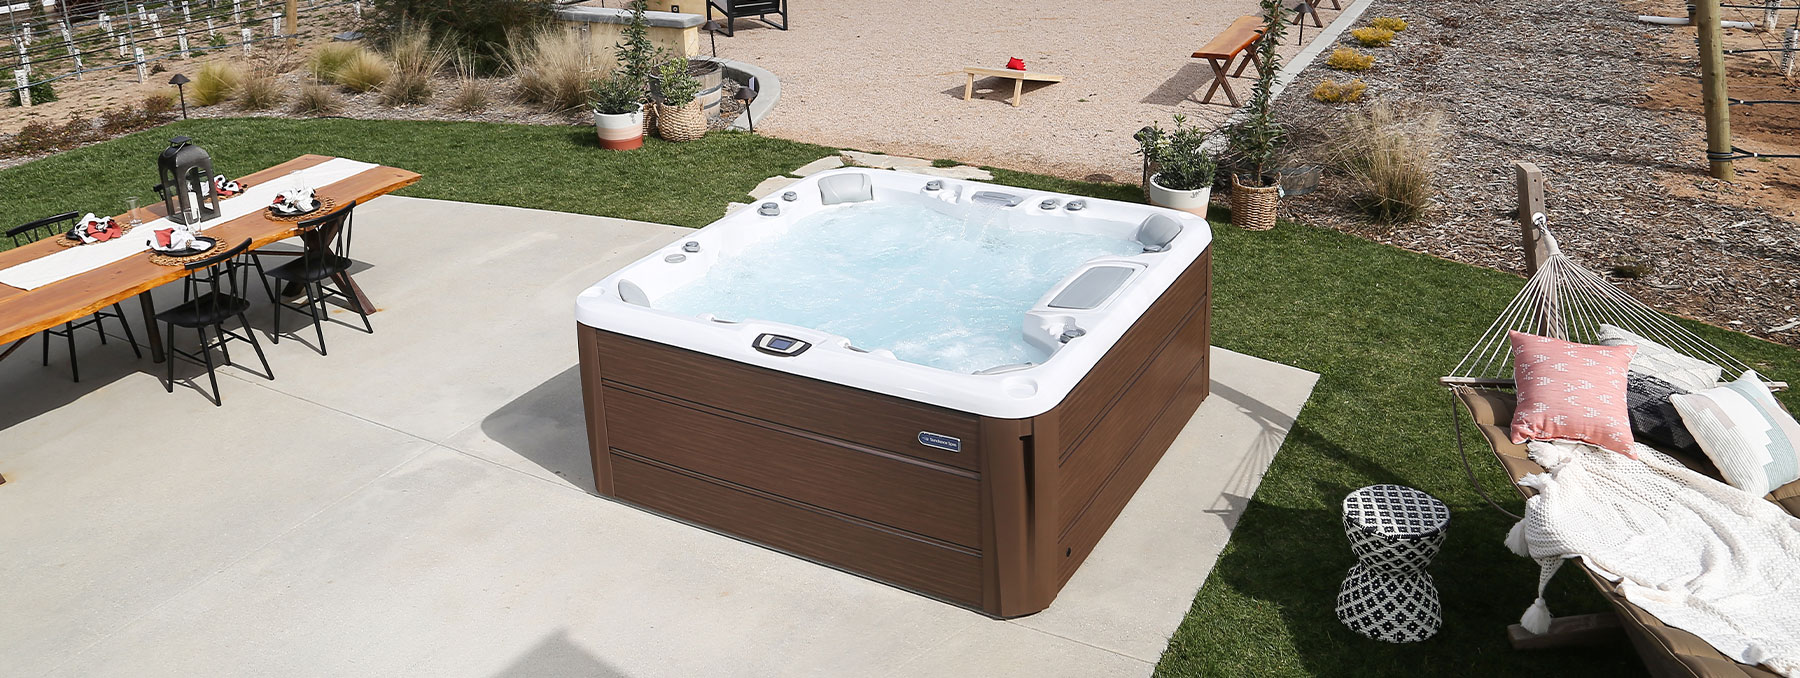 Do you sell used hot tubs?